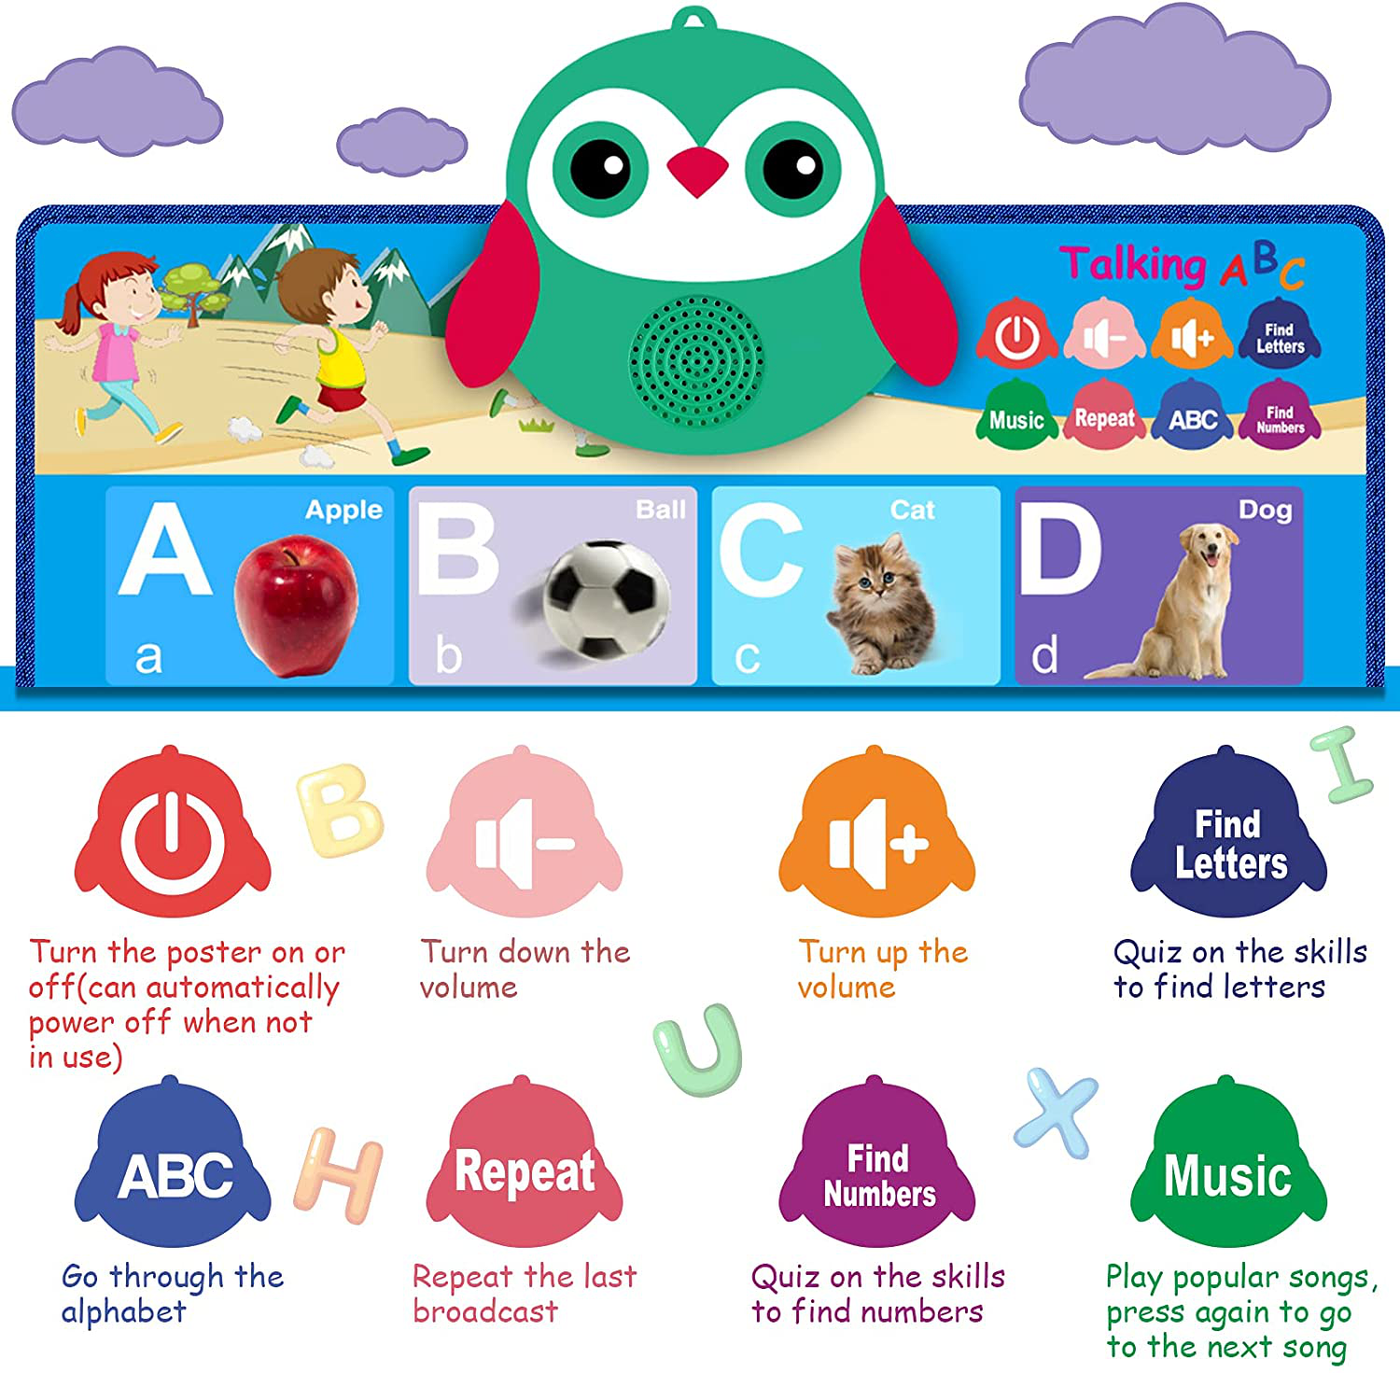 Vimzone Electronic Interactive Alphabet Wall Chart, Talking Poster,Learning ABC&123s Numbers&Music,Preschool Educational Toys and for 3+ Years Old Boys Girls ,9 PCS.